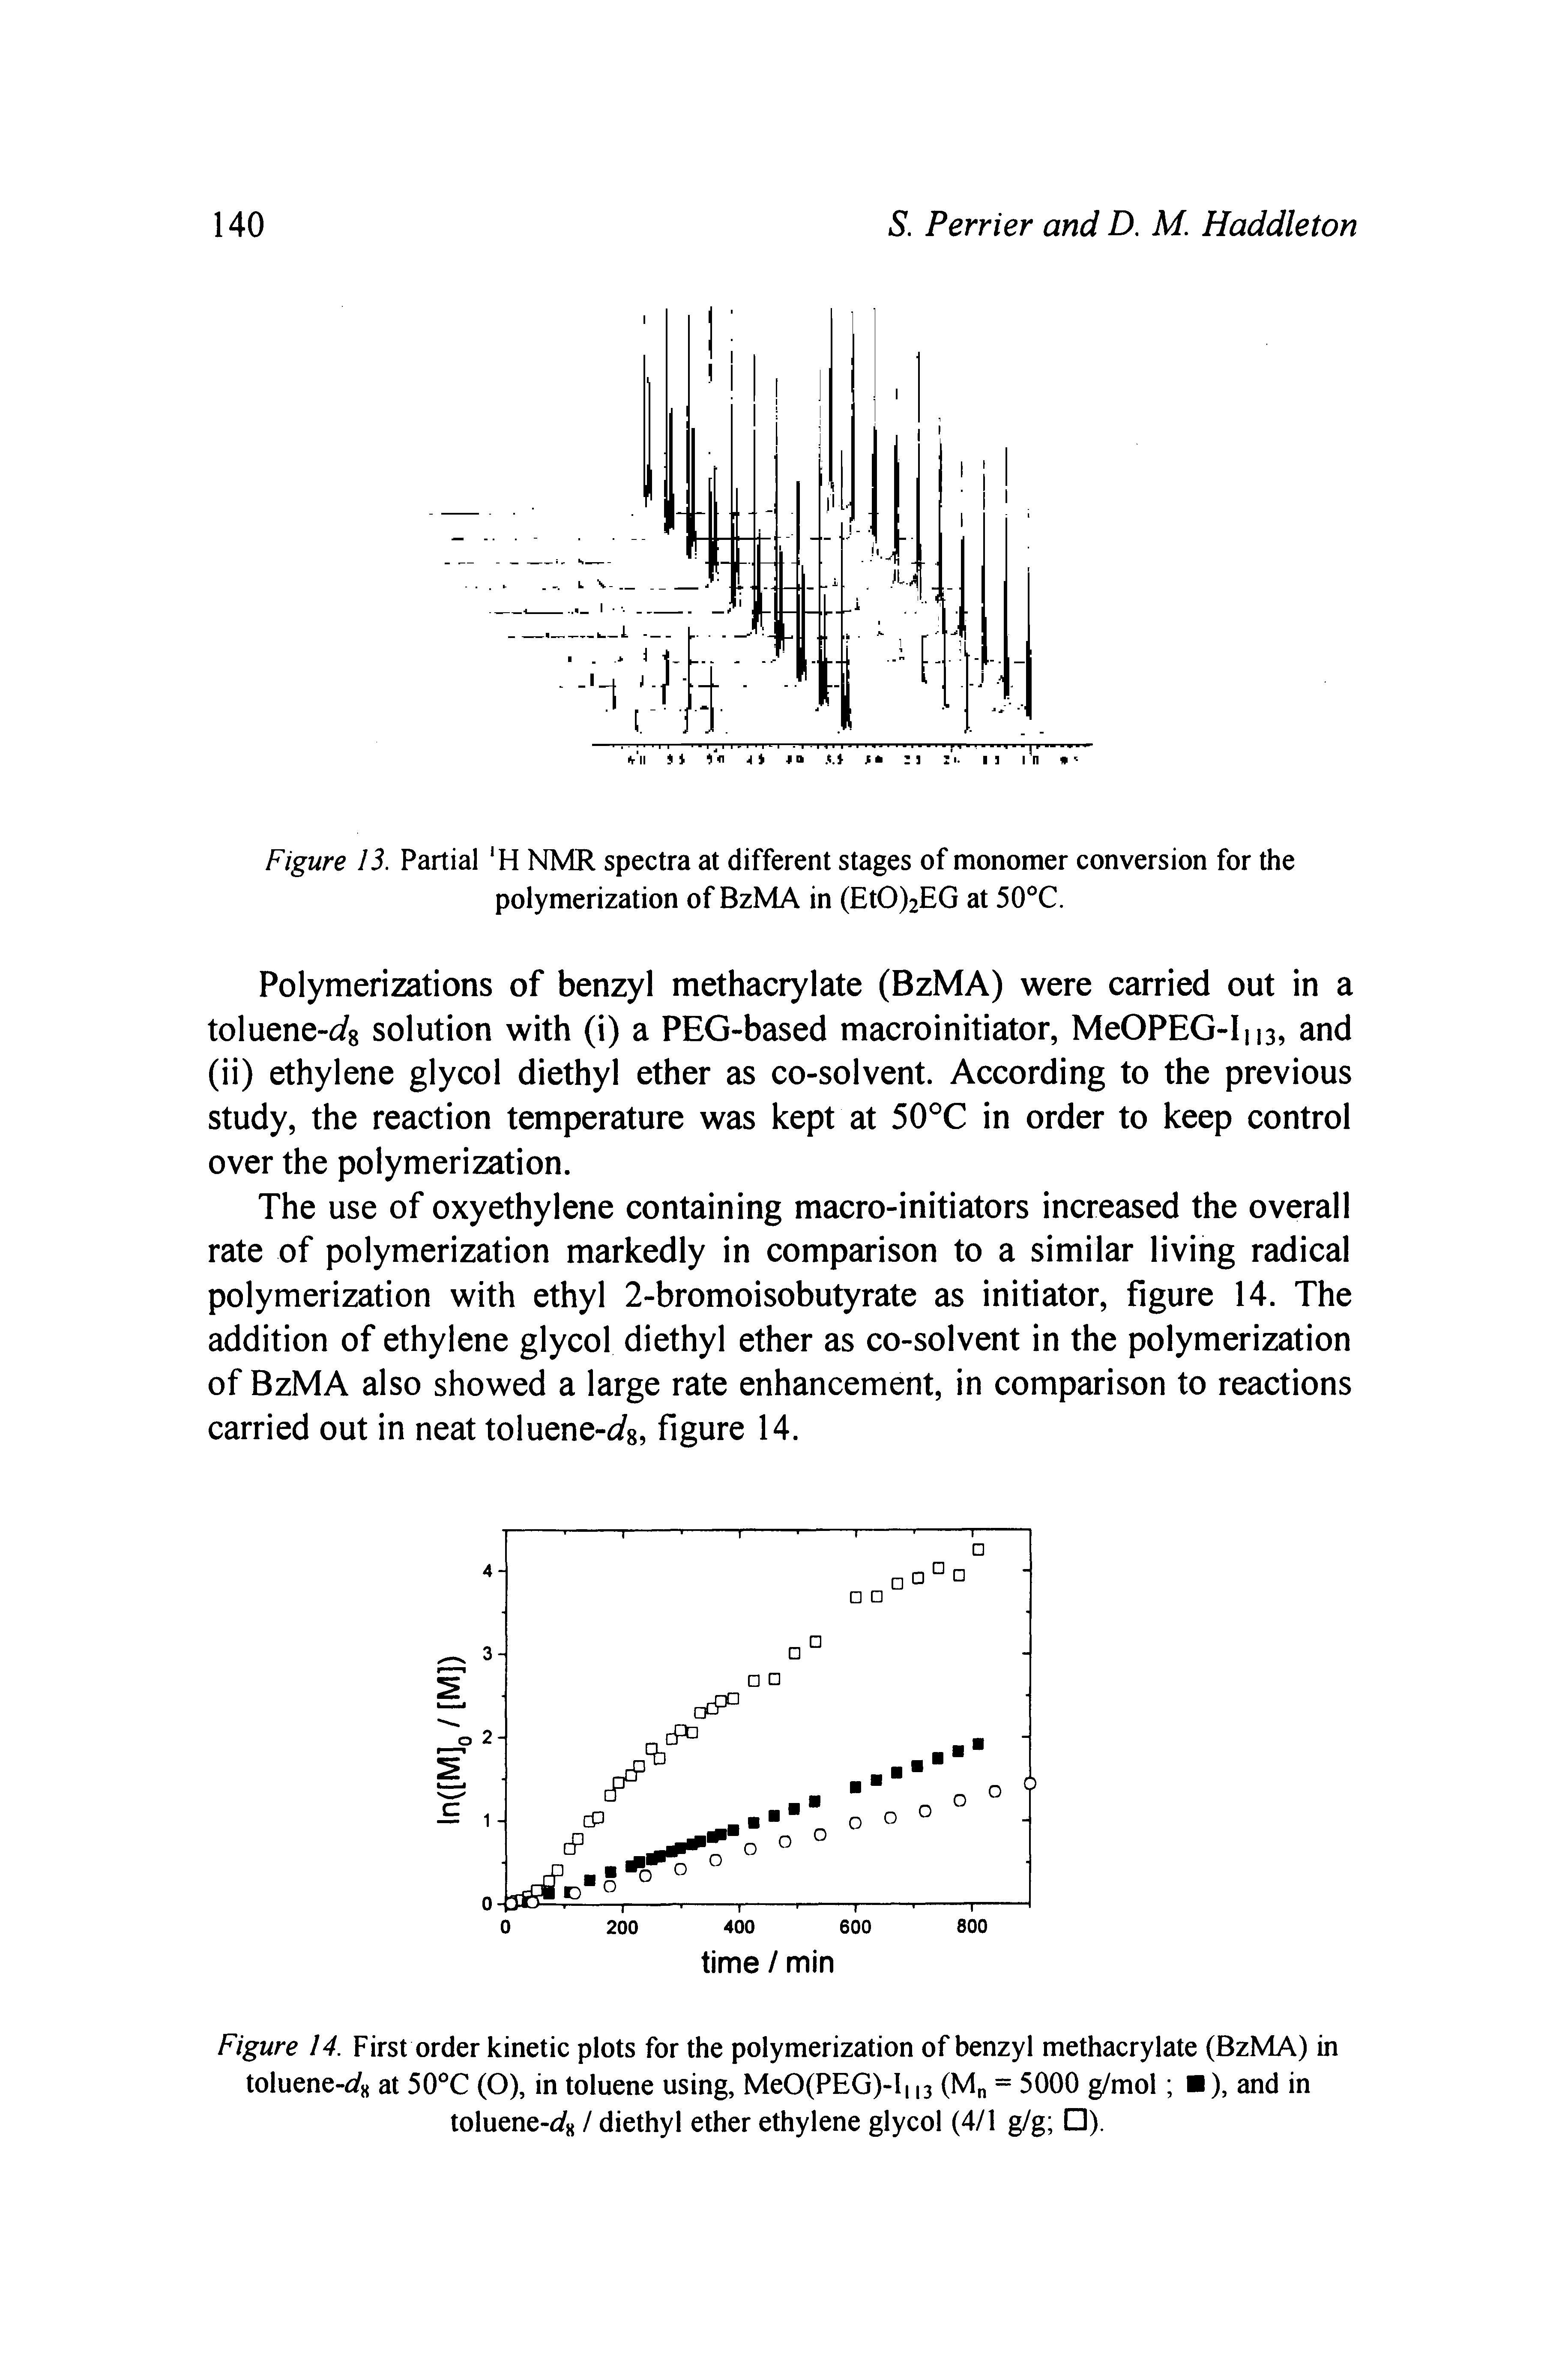 Figure 14. First order kinetic plots for the polymerization of benzyl methacrylate (BzMA) in toluene-(is at 50°C (O), in toluene using, MeO(PEG)-I 13 (M = 5000 g/mol ), and in toluene-afx / diethyl ether ethylene glycol (4/1 g/g ).